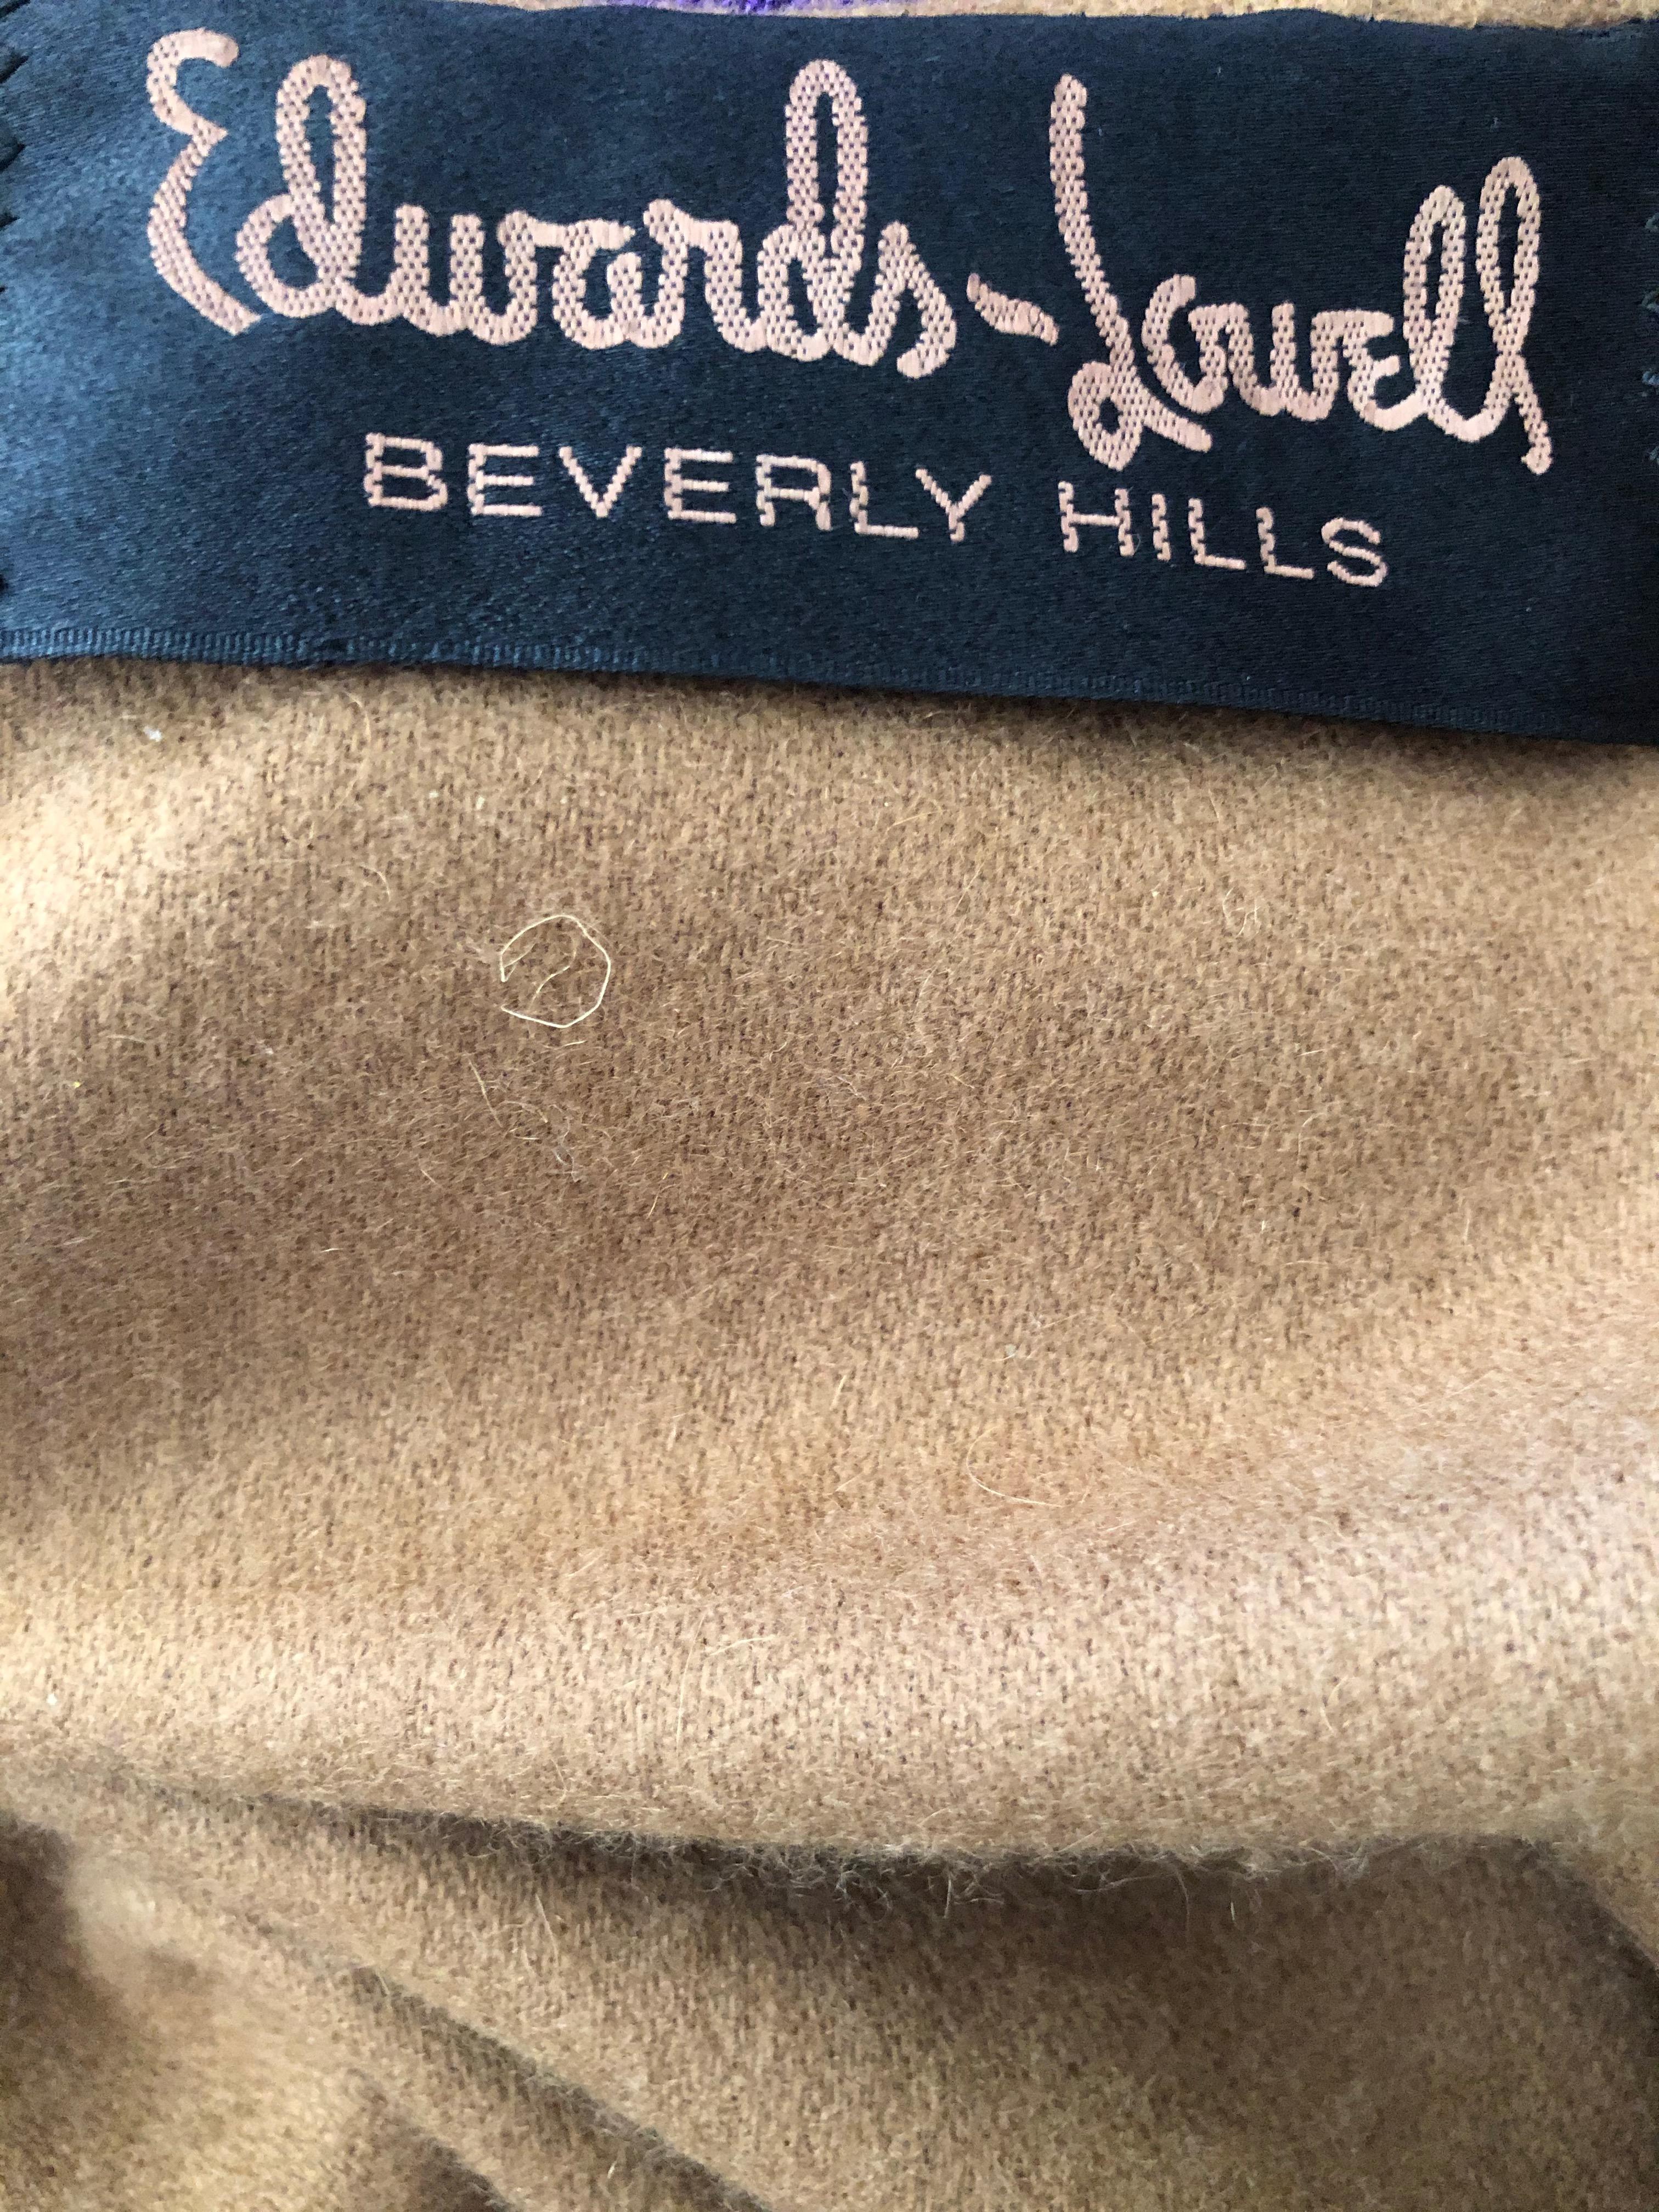 Vintage Chinchilla Trim Cashmere Vicuna Shawl Edwards Lowell Beverly Hills For Sale 2